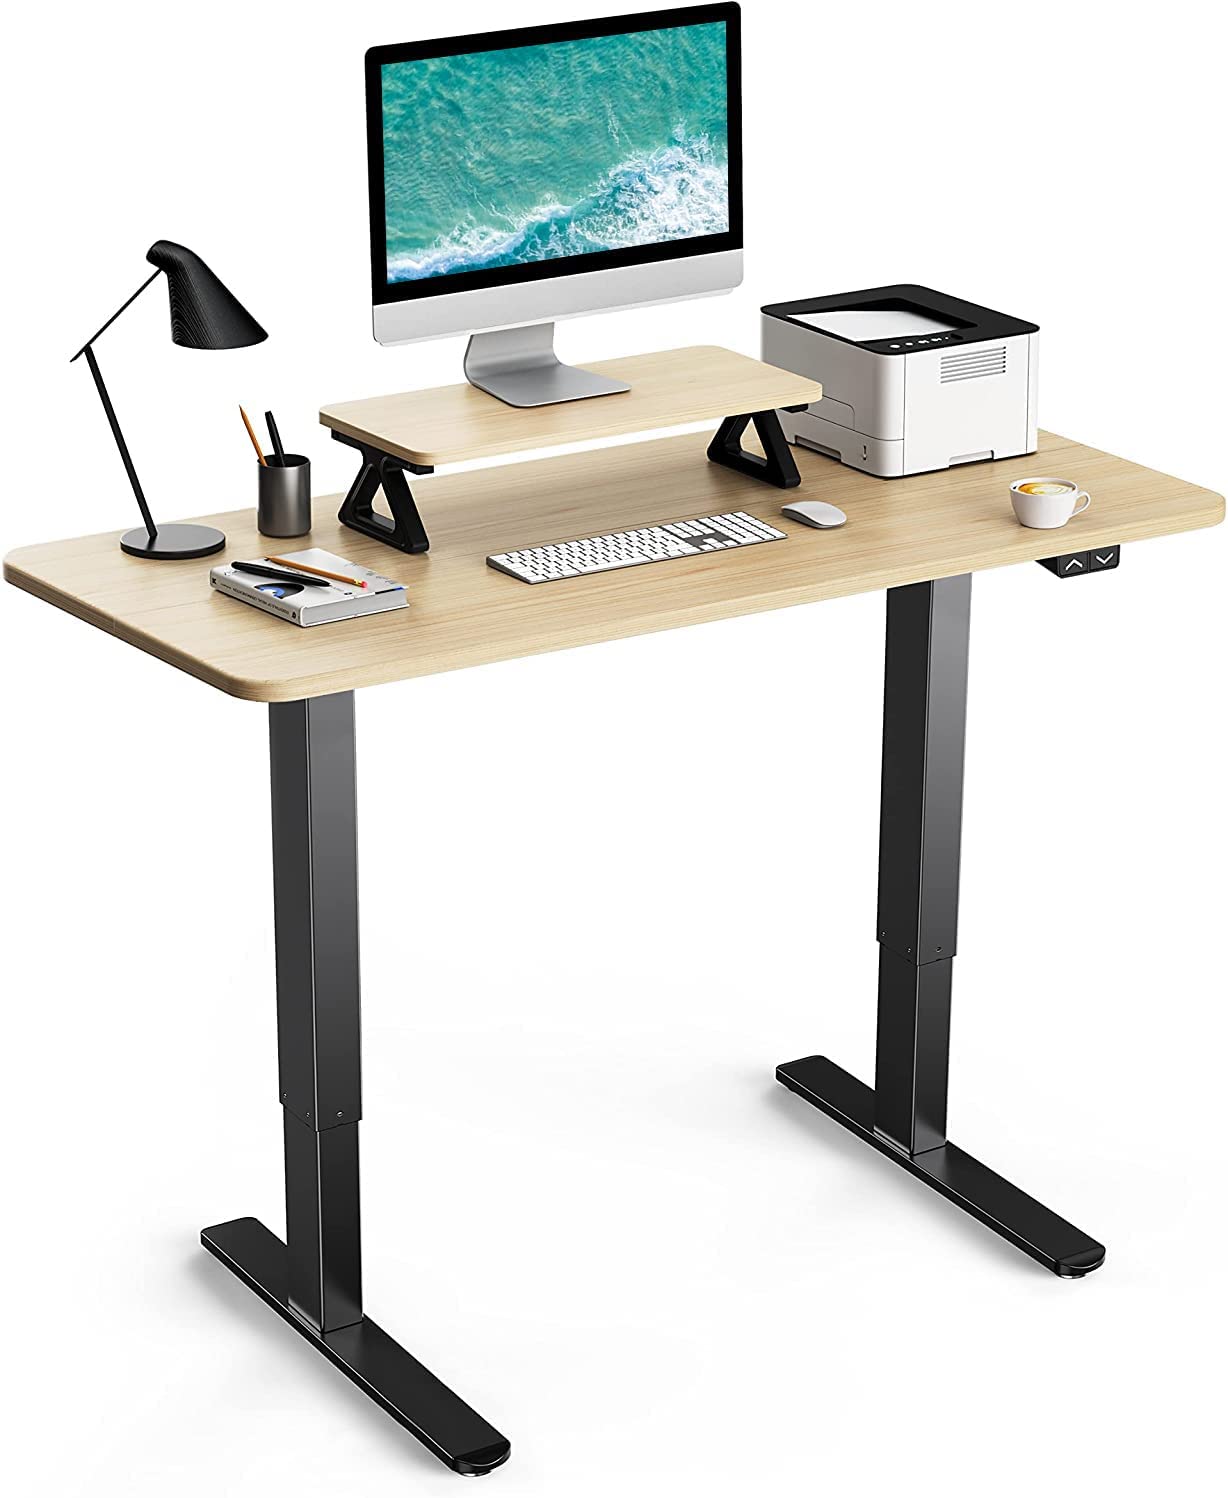 Totnz Electric Standing Desk Height Adjustable Table, Ergonomic Home Office Furniture $143.95 at Amazon